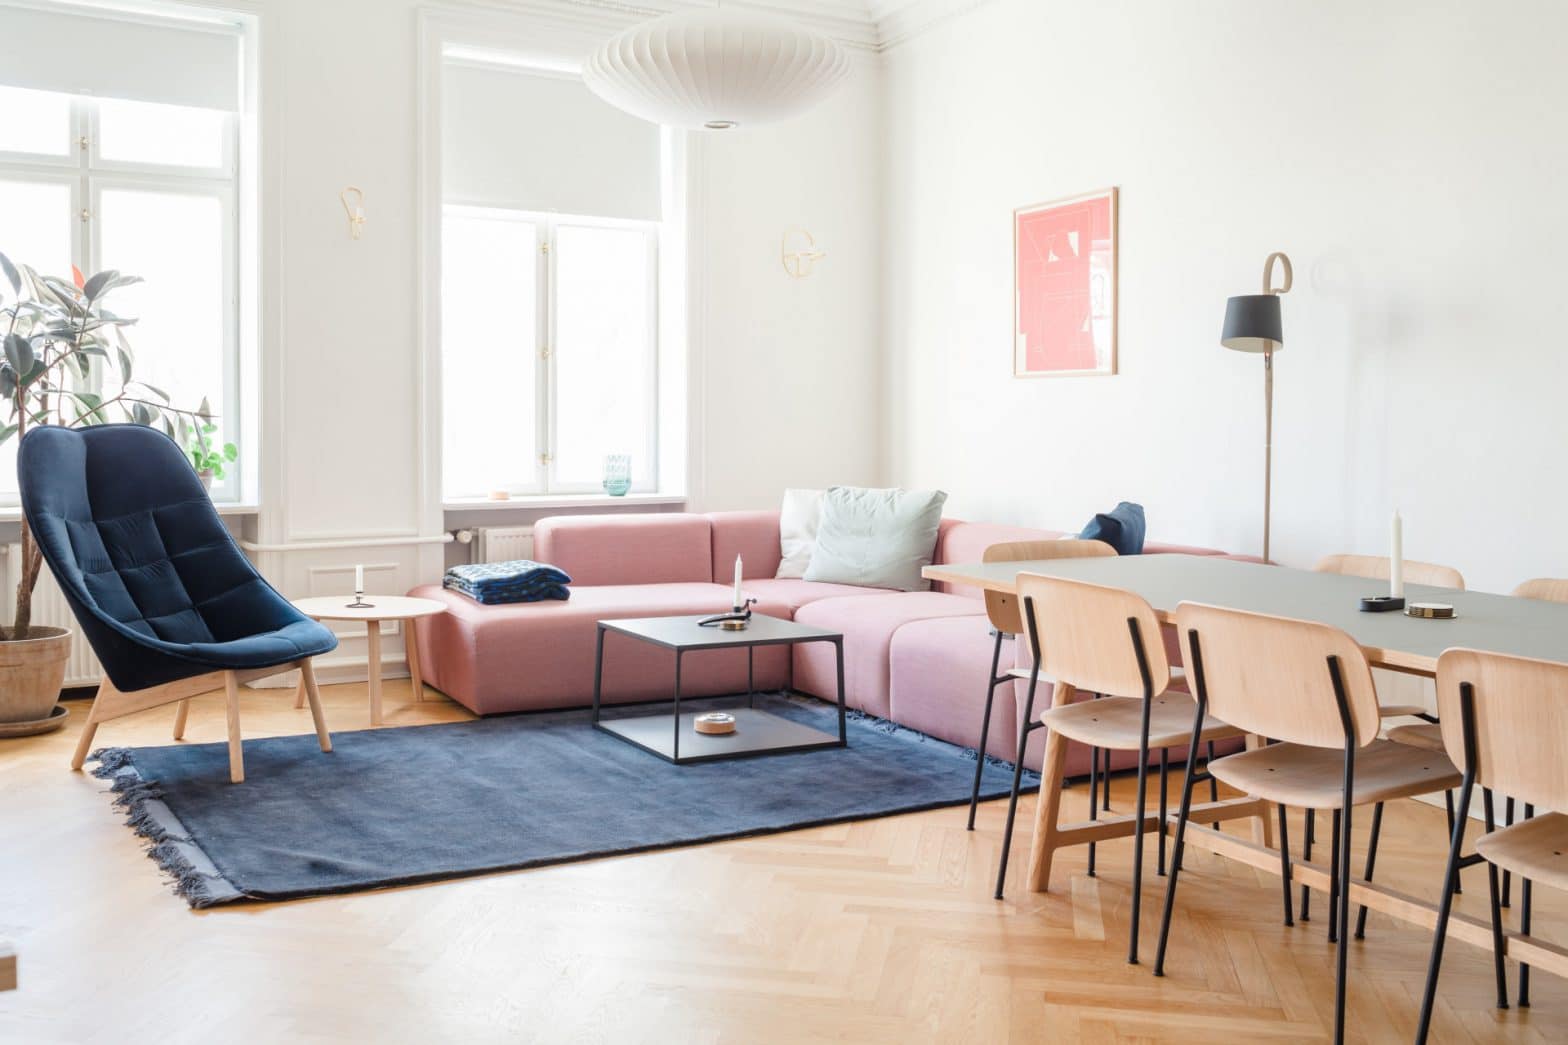 Co-living, an attractive housing alternative for expats